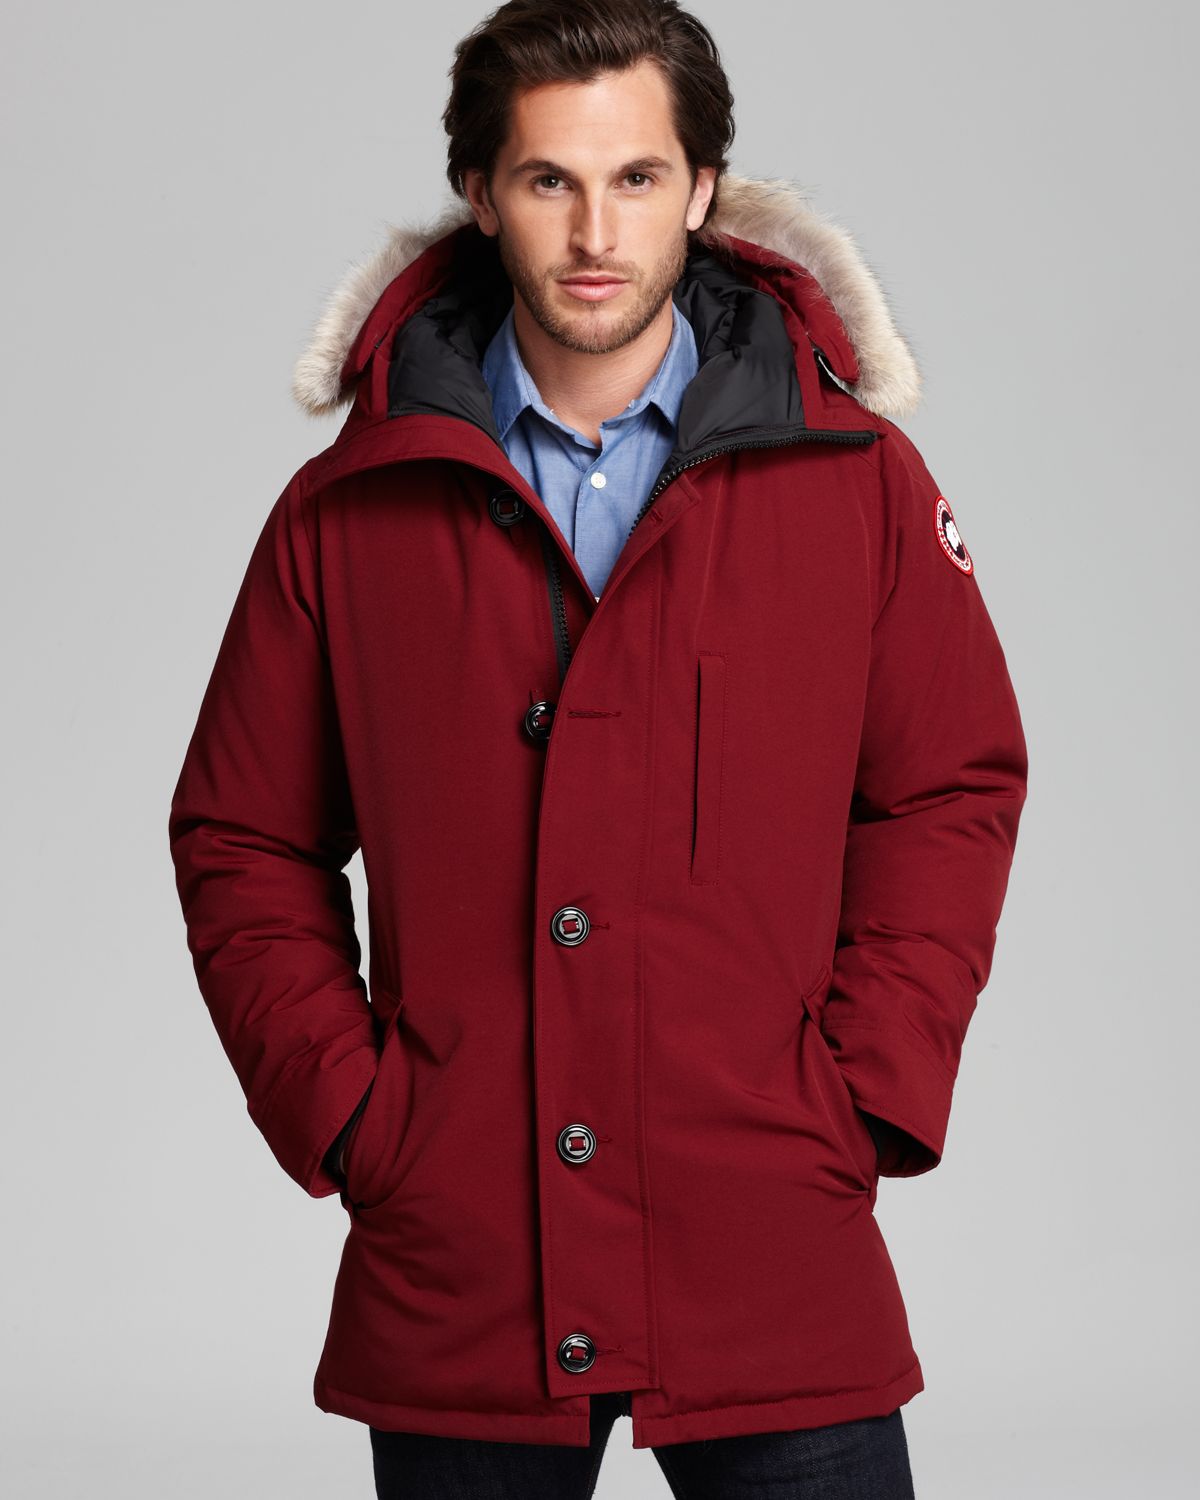 Lyst - Canada Goose Chateau Parka with Fur Hood in Red for Men